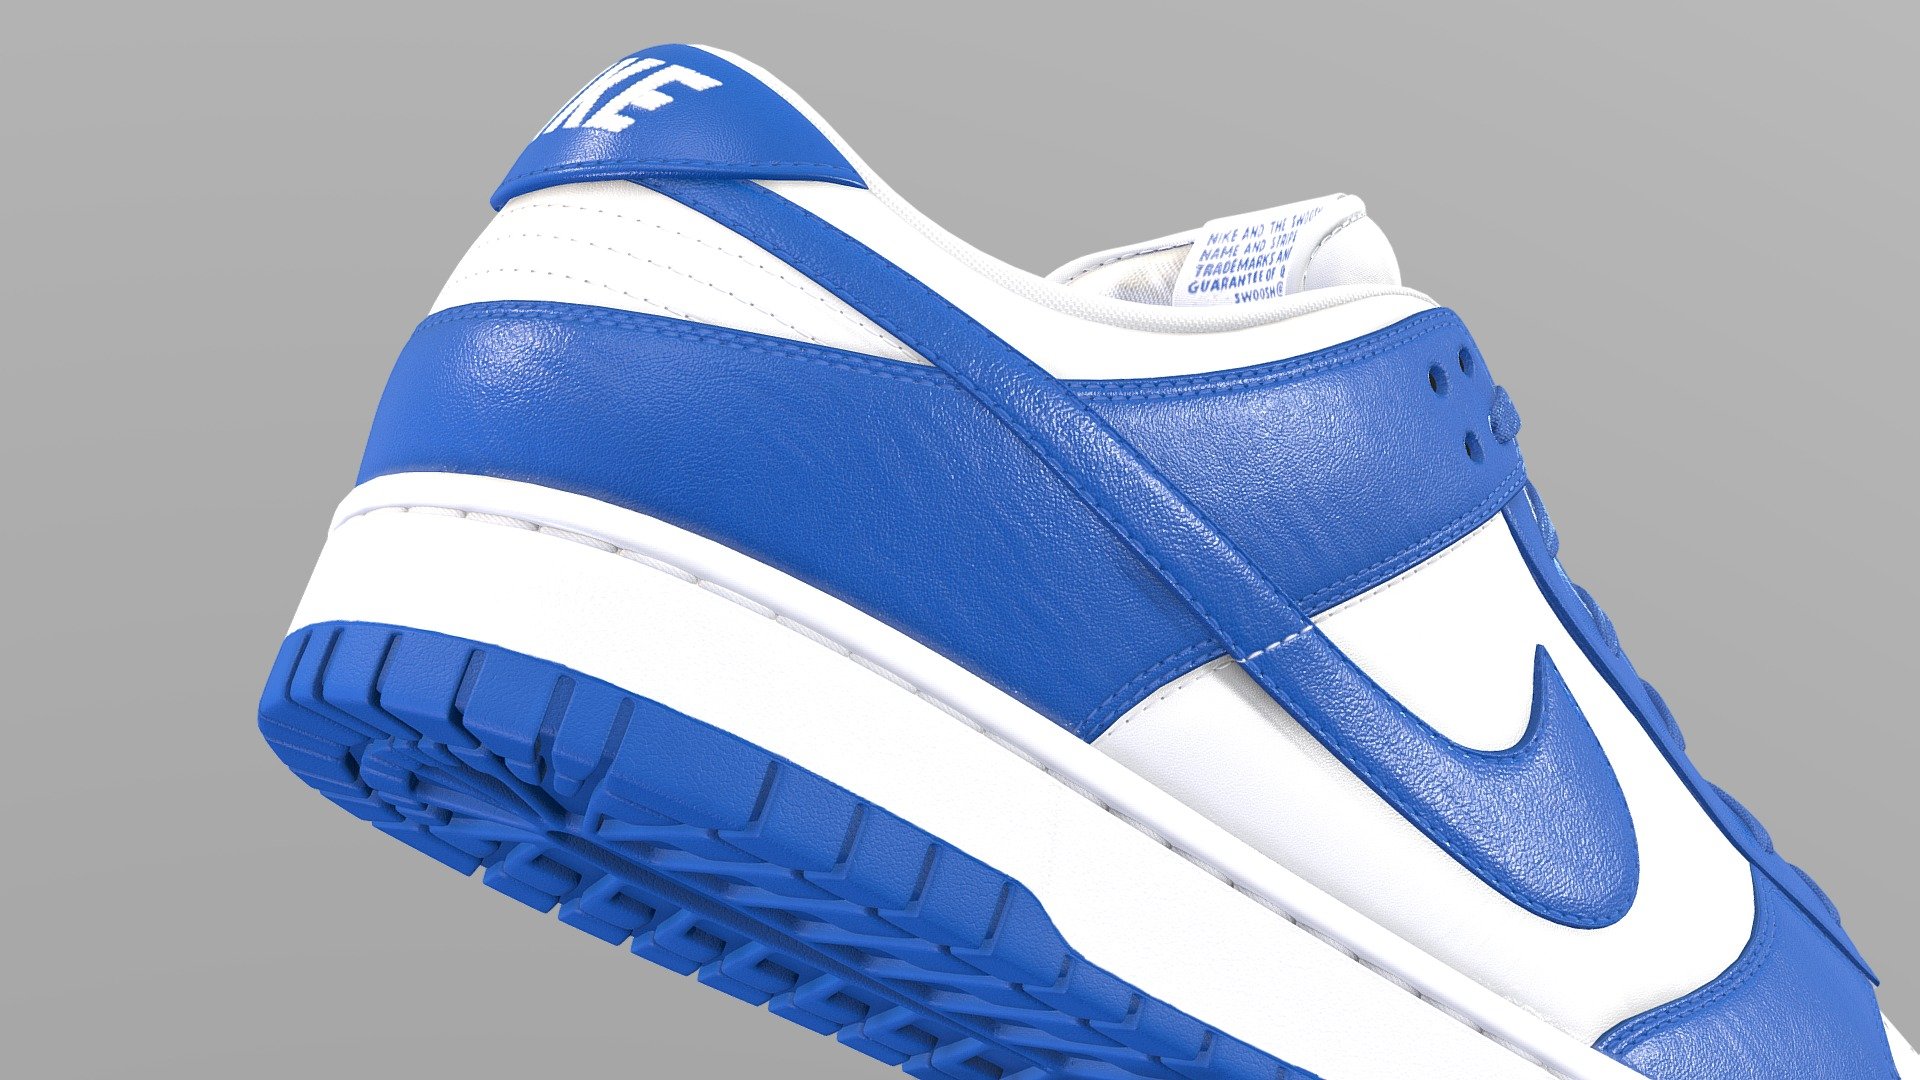 Nike Dunk Low in the Kentucky Colourway. Every detail was made in the recreation of this shoe, from the text on the medial side of the shoe to the subtlety of each material, nothing went overlooked. Stitches were sculpted by hand to achieve the highest quality

What's included




Blender file with linked textures

FBX and OBJ versions

OneMesh version

All 4k textures

Model Features

The upmost care went into crafting this model. As a result it is subdivision ready. The model was unwrapped with efficiency in mind. Both left and right shoes are mostly identical, save for logos and text that cannot be mirrored. As such the high detail version of the shoe uses 4 UV maps to cover both of the shoes, with the One mesh version using just the one UV map 3d model